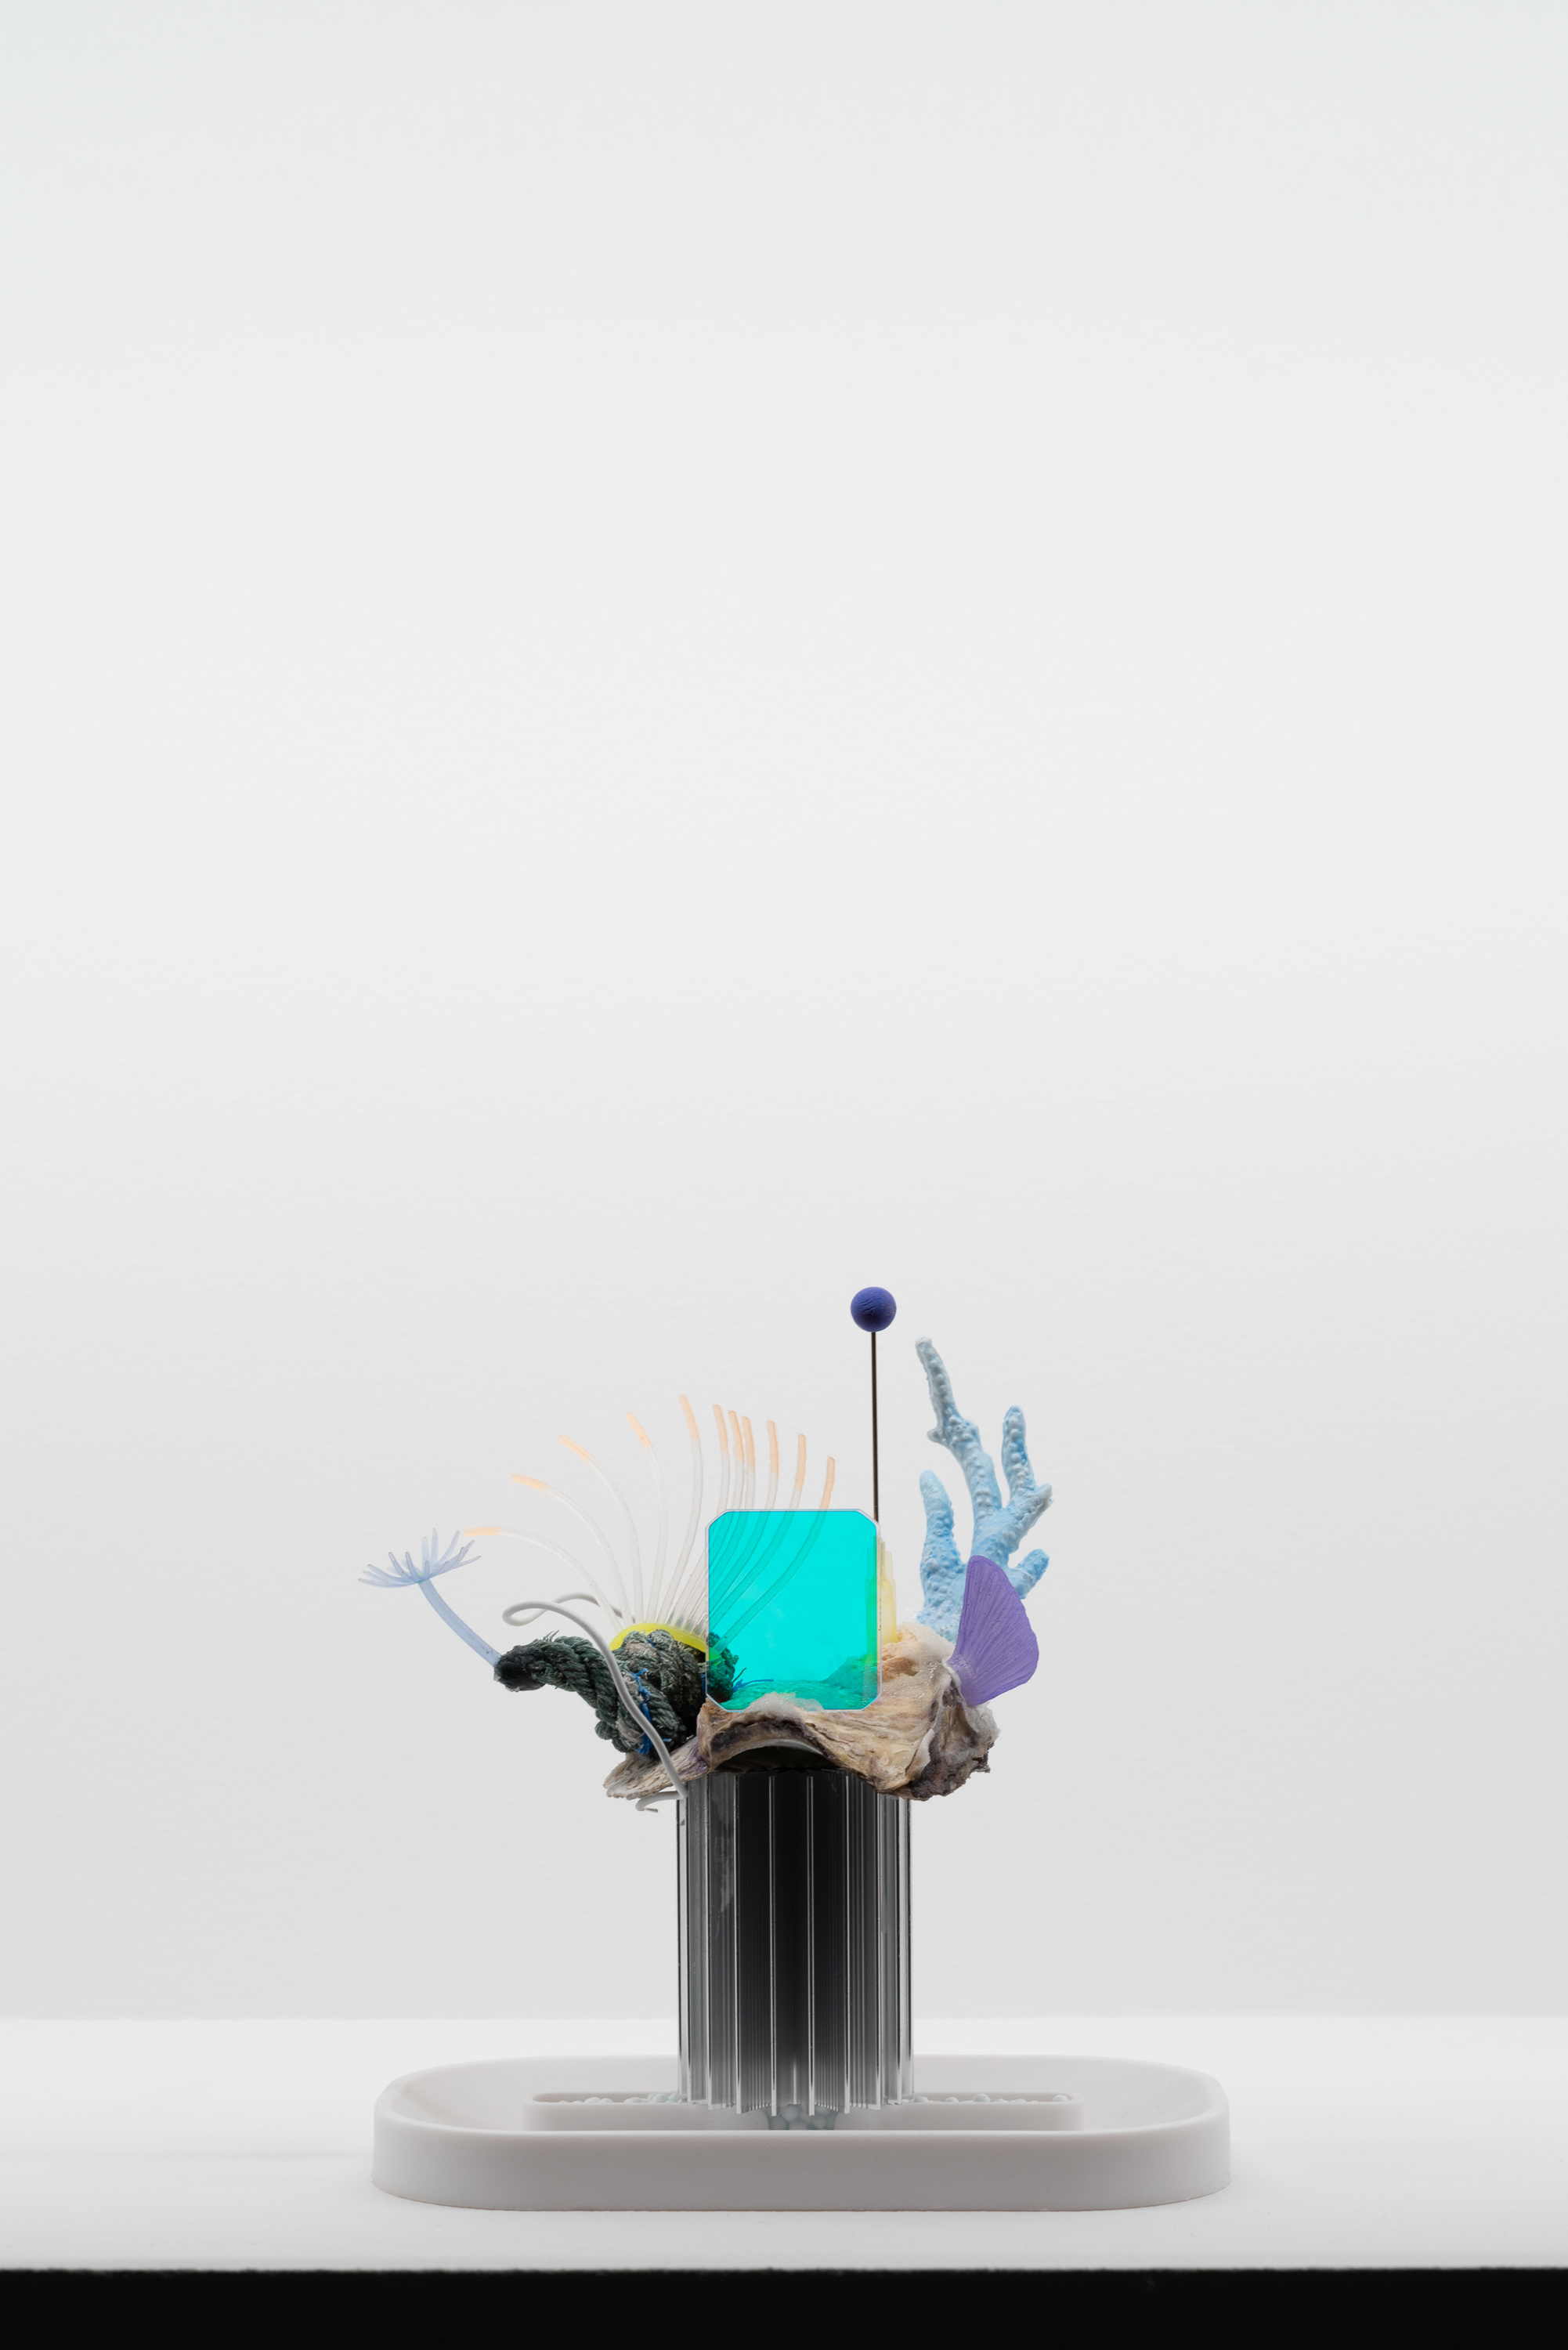 Théo Massoulier 5G, 2021 Ceramic, coral, plastic fragment, dichroic glass plate, dried plant, mineral, 12 (L) x 8 (W) x 8,5 (H) cm. Photo/ Adrien Thibault. Courtesy of the artist and HATCH. 2/6